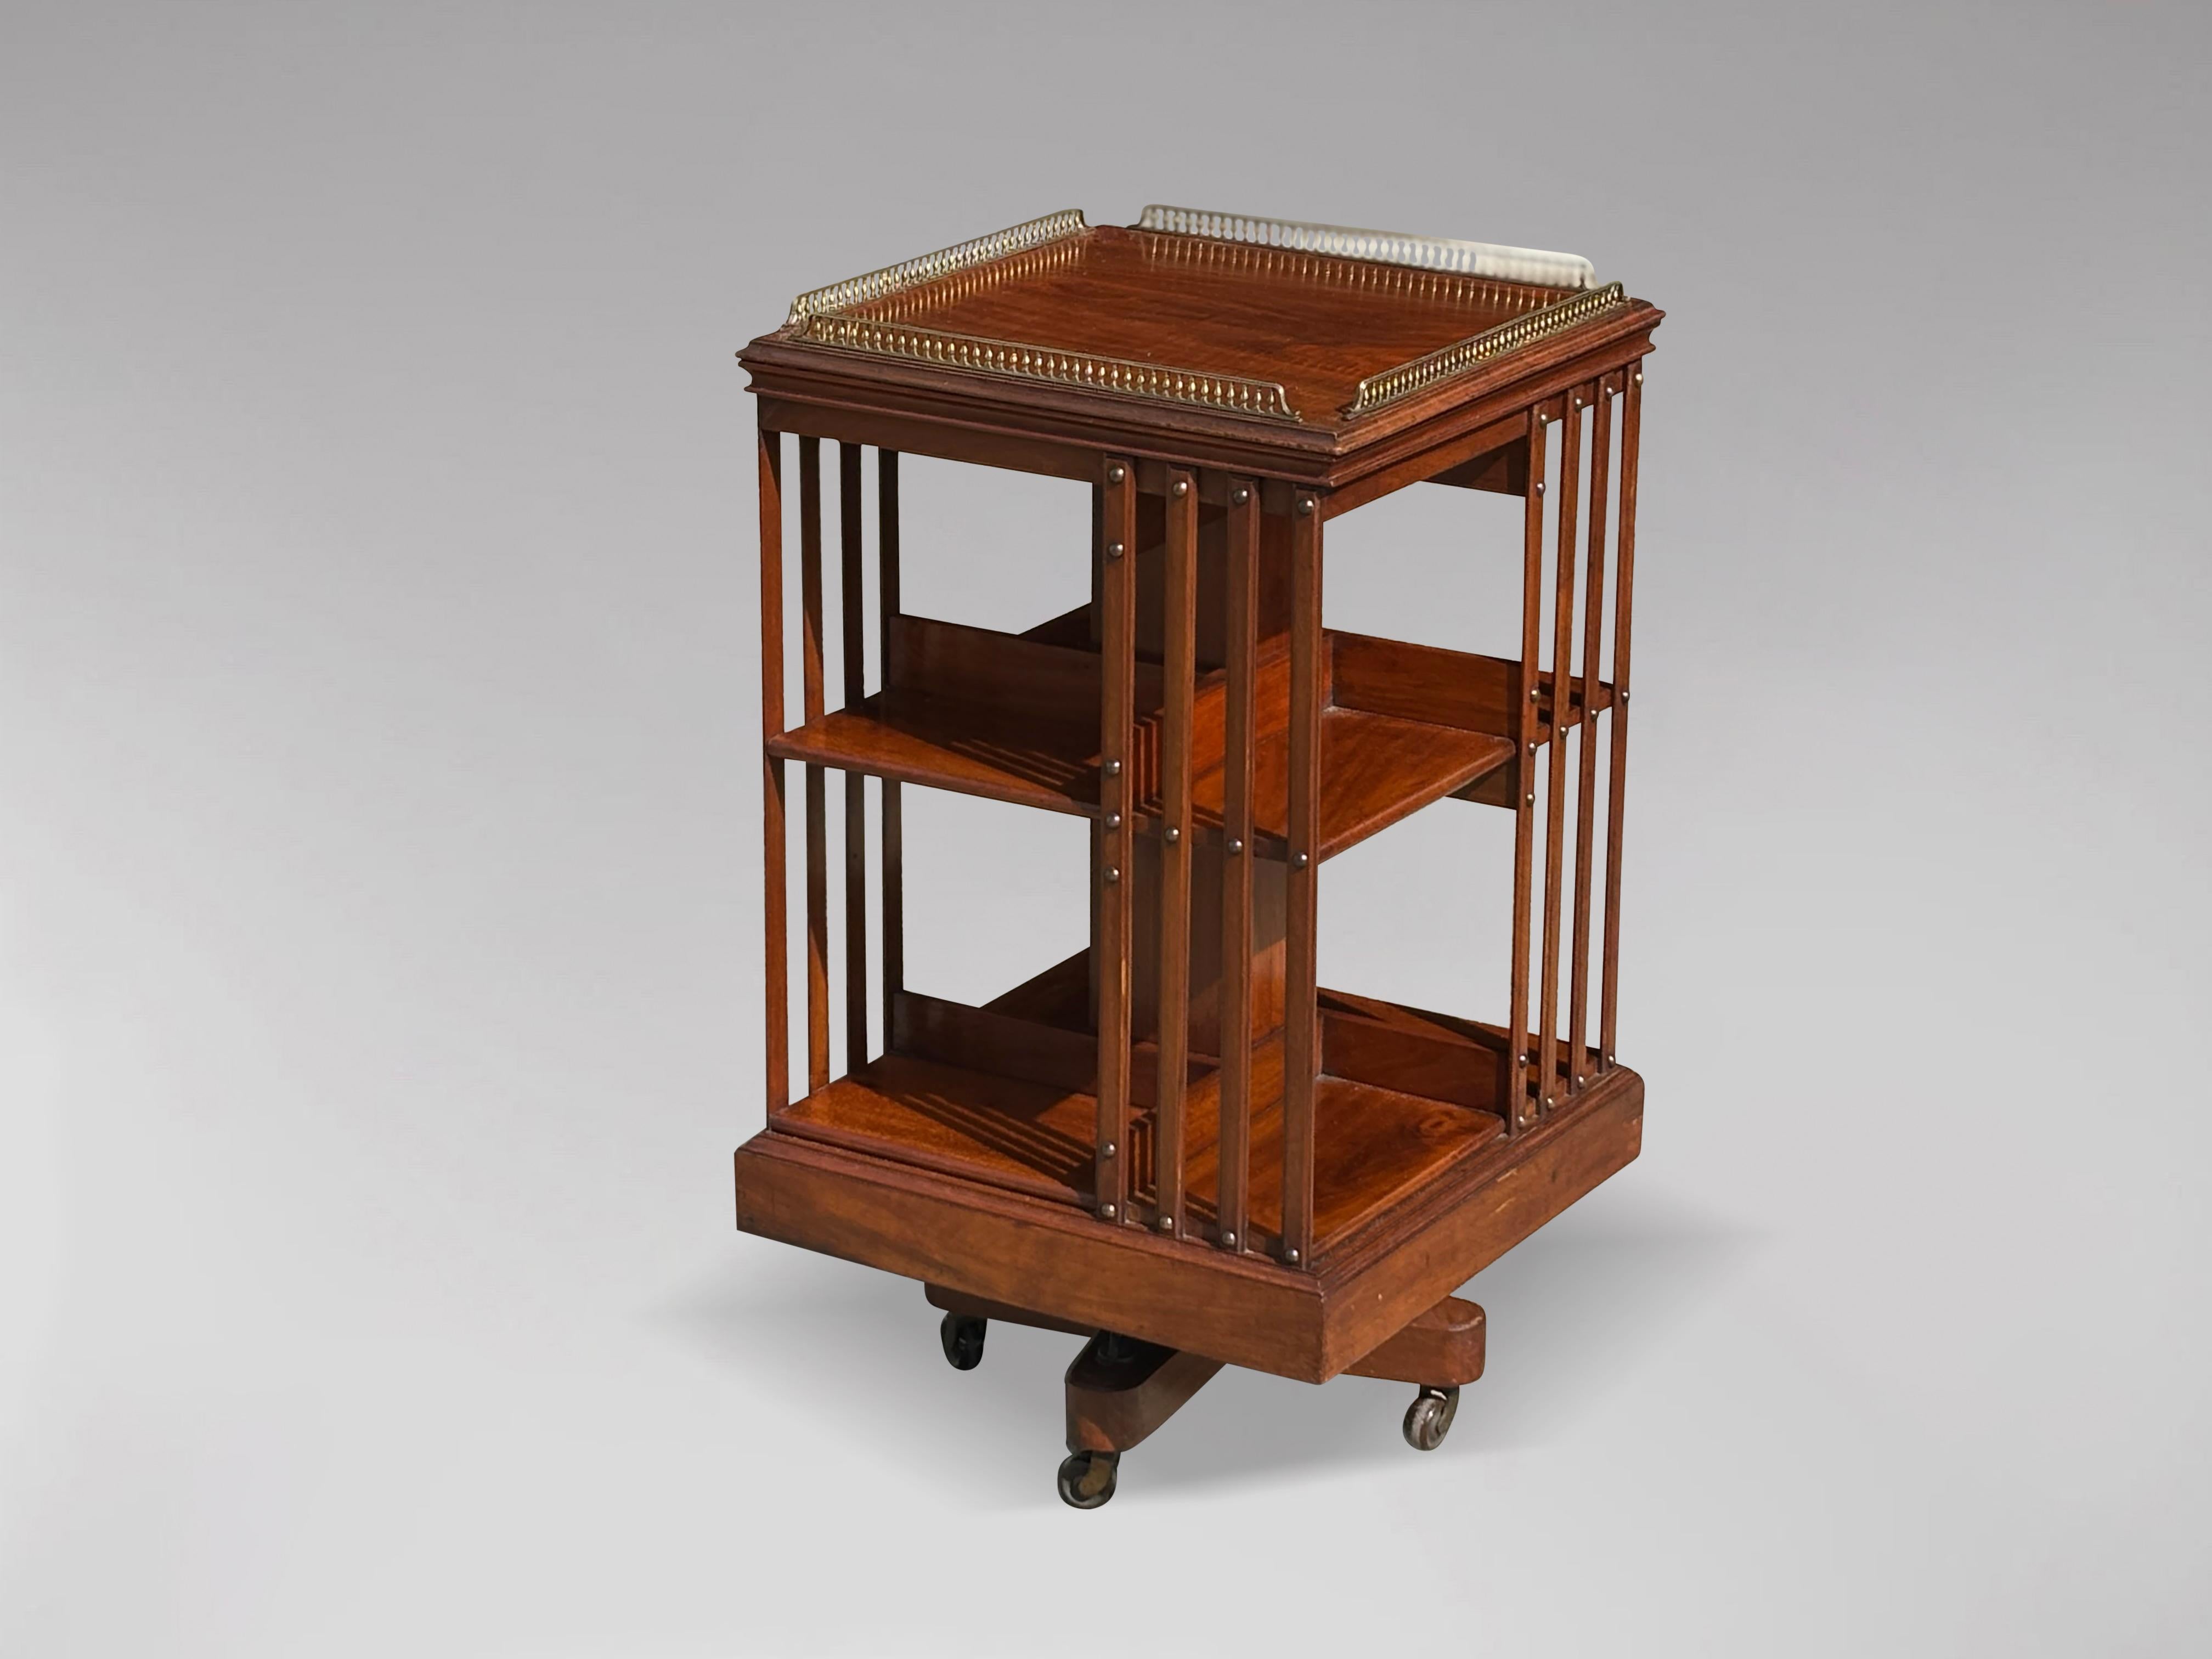 An attractive 19th century mahogany revolving bookcase by Maple & Co. London Paris with slatted sides, brass gallery top, moulded edge, above two-tiered bookshelf with quarter sections divided by inlaid slats running from top to the base fastened